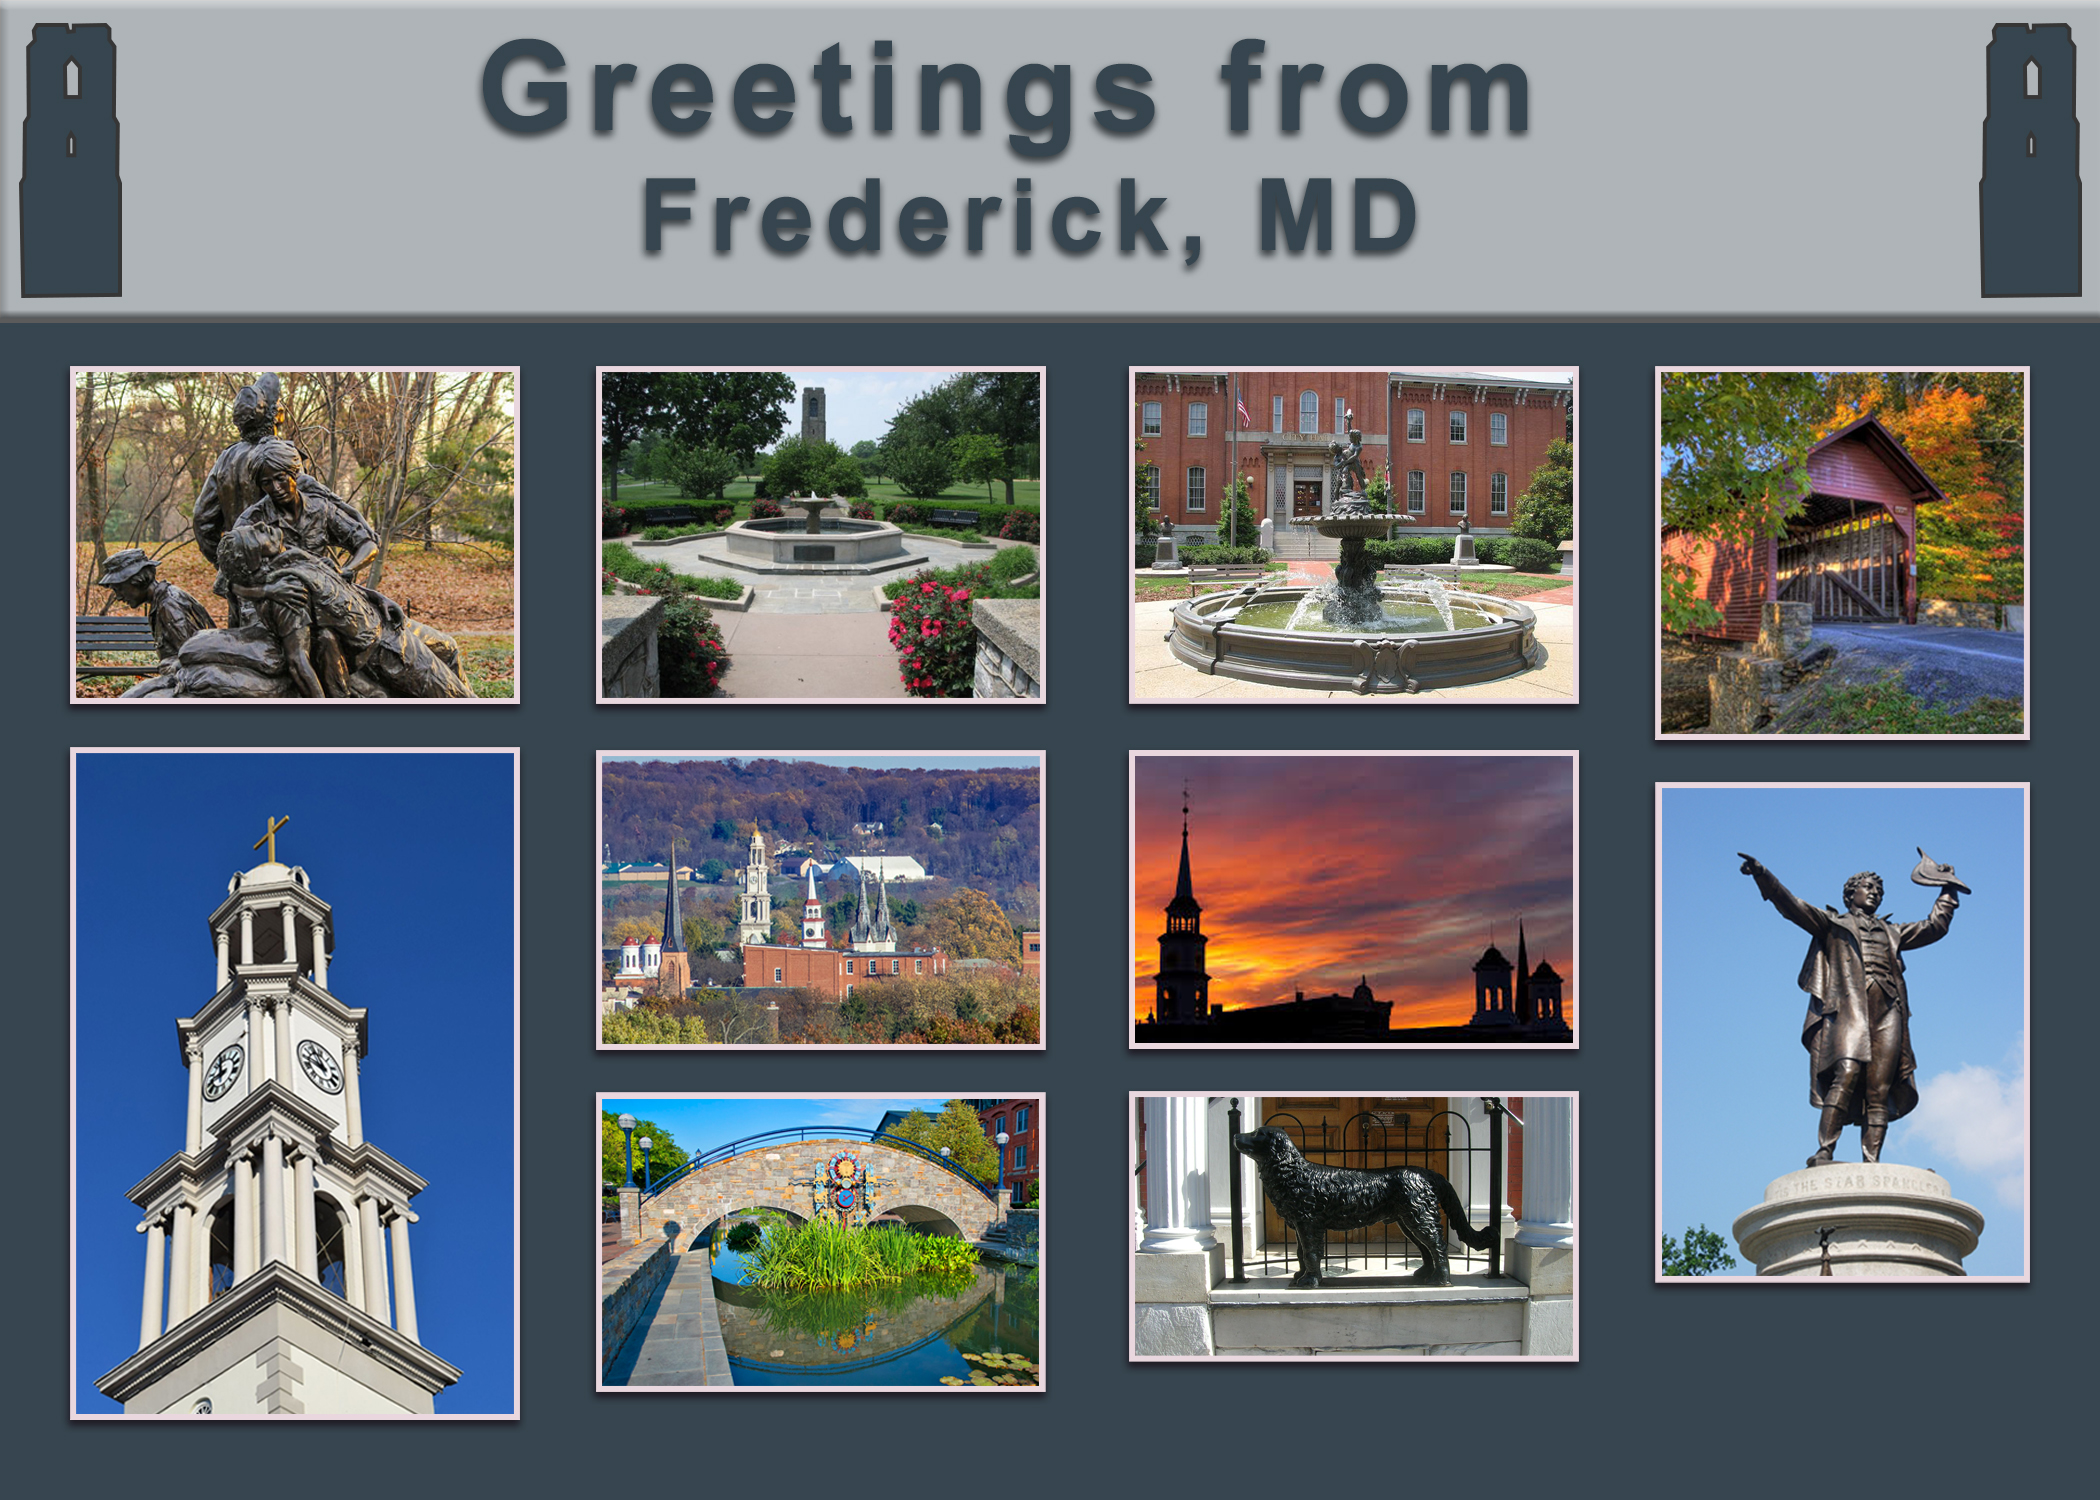 Postcard with images from Frederick, Maryland.